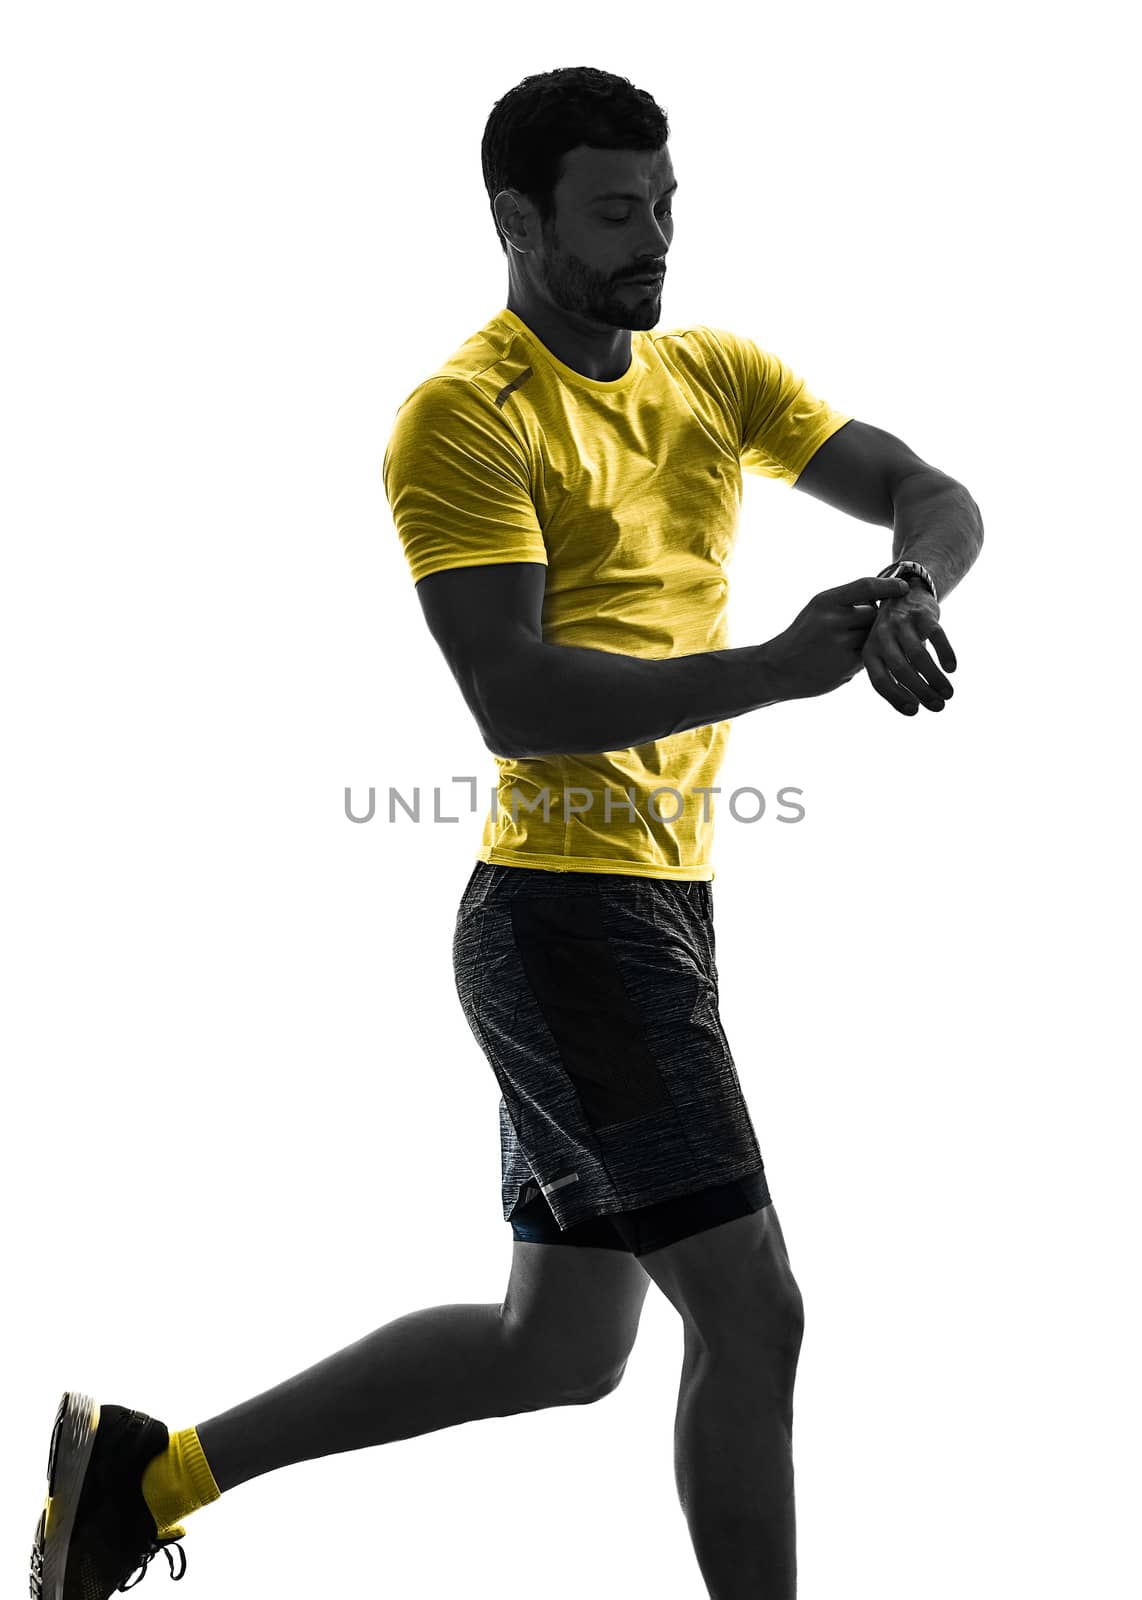 one caucasian man runner running jogging jogger time silhouette isolated on white background